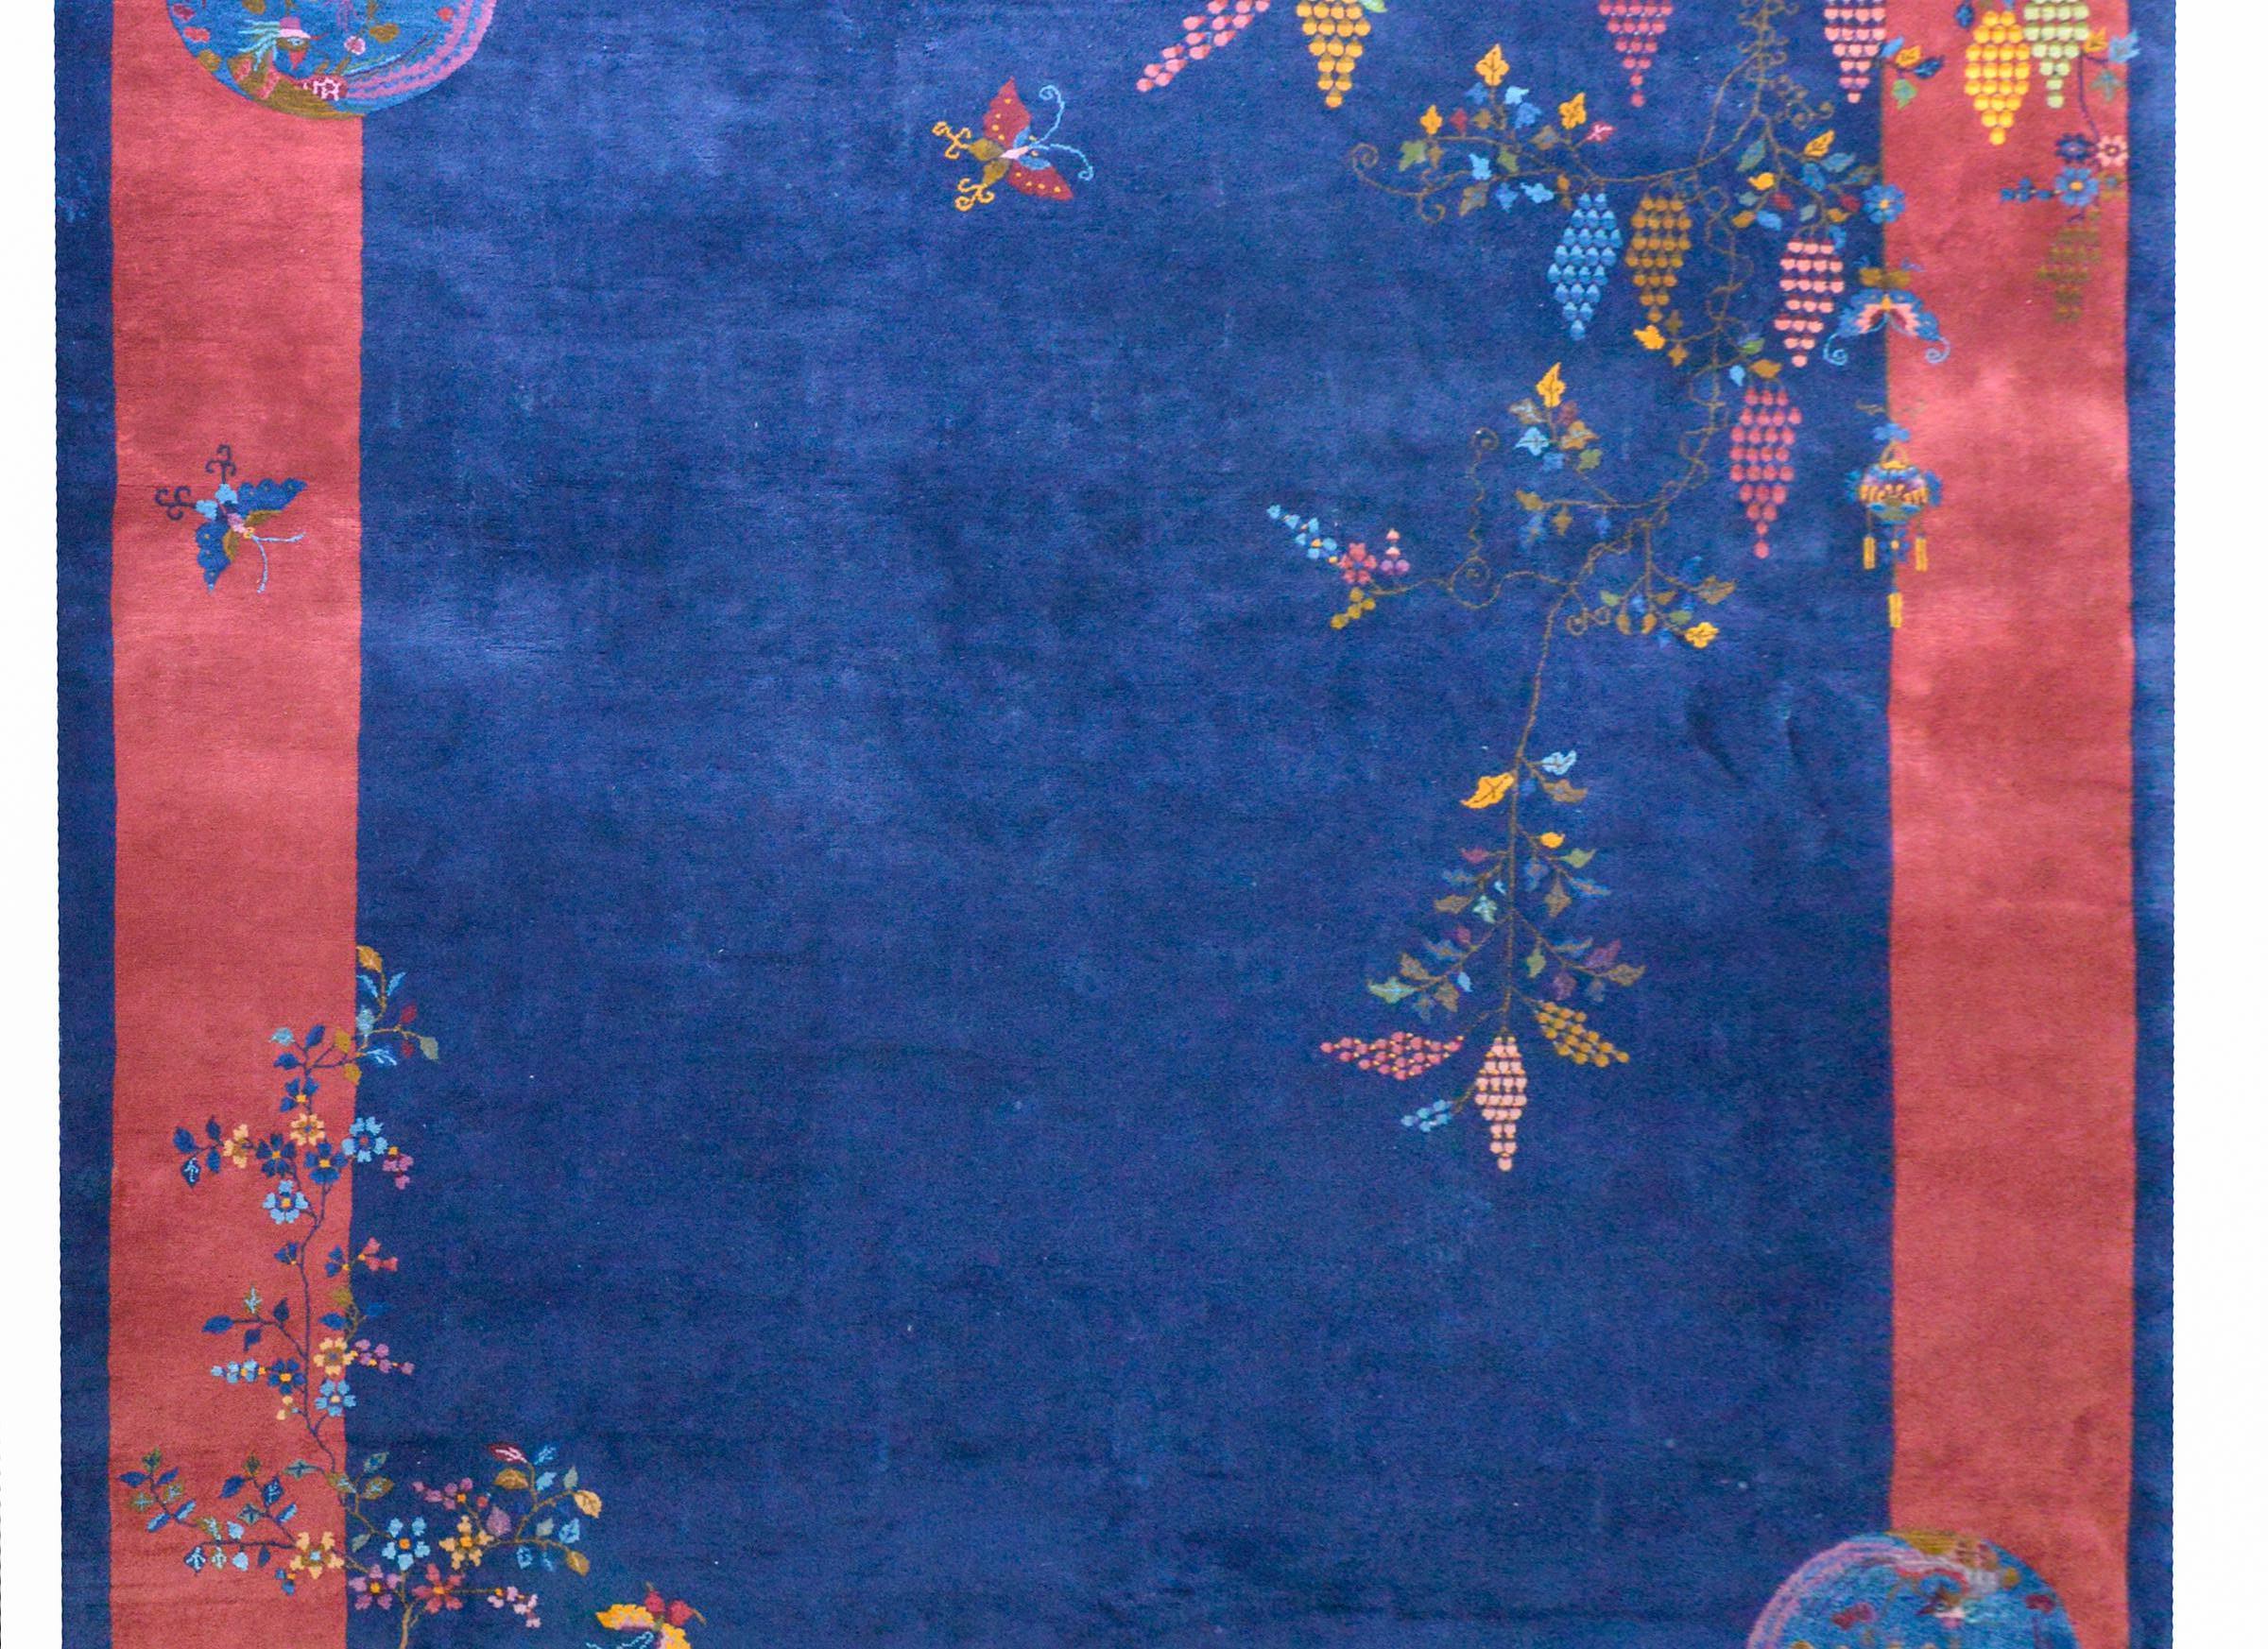 A wonderful early 20th century Chinese Art Deco rug with a dark indigo field surrounded by a wide dark cranberry and a thin indigo border. Myriad auspicious flowers including peonies, chrysanthemums, wisteria, and cherry blossoms, all woven in